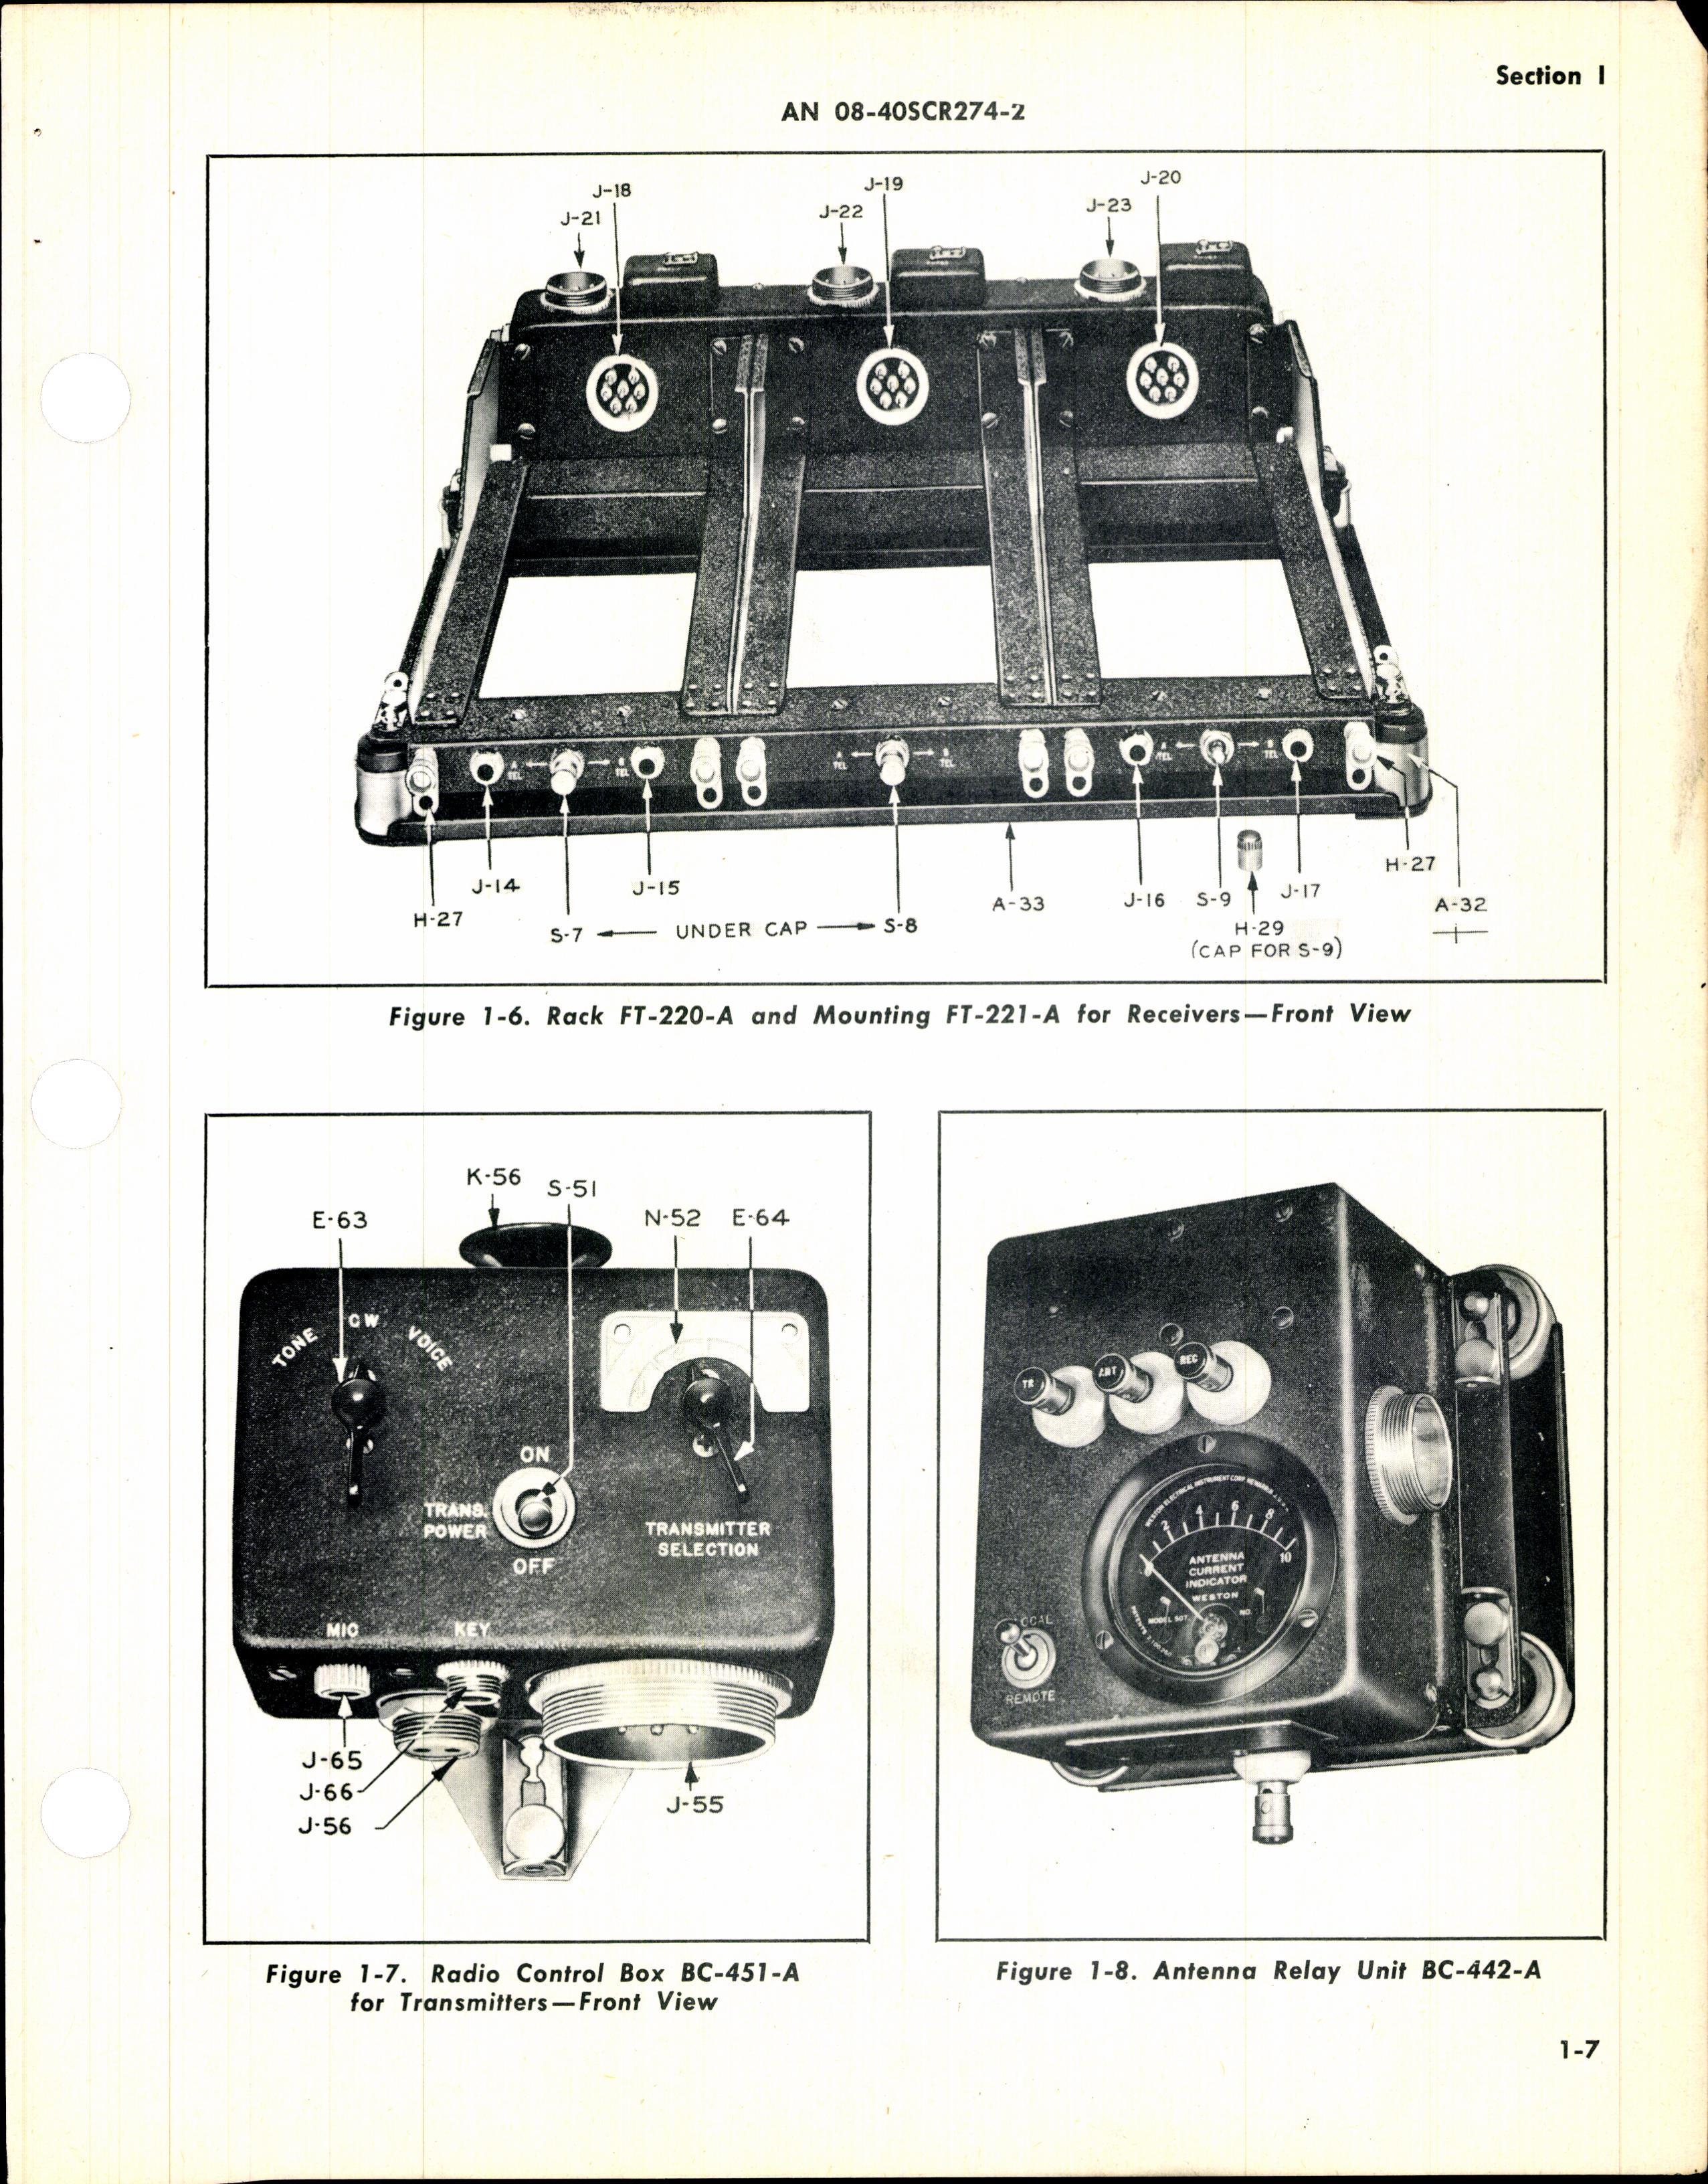 Sample page 13 from AirCorps Library document: Handbook Operating Instructions for Radio Set SCR-274-N